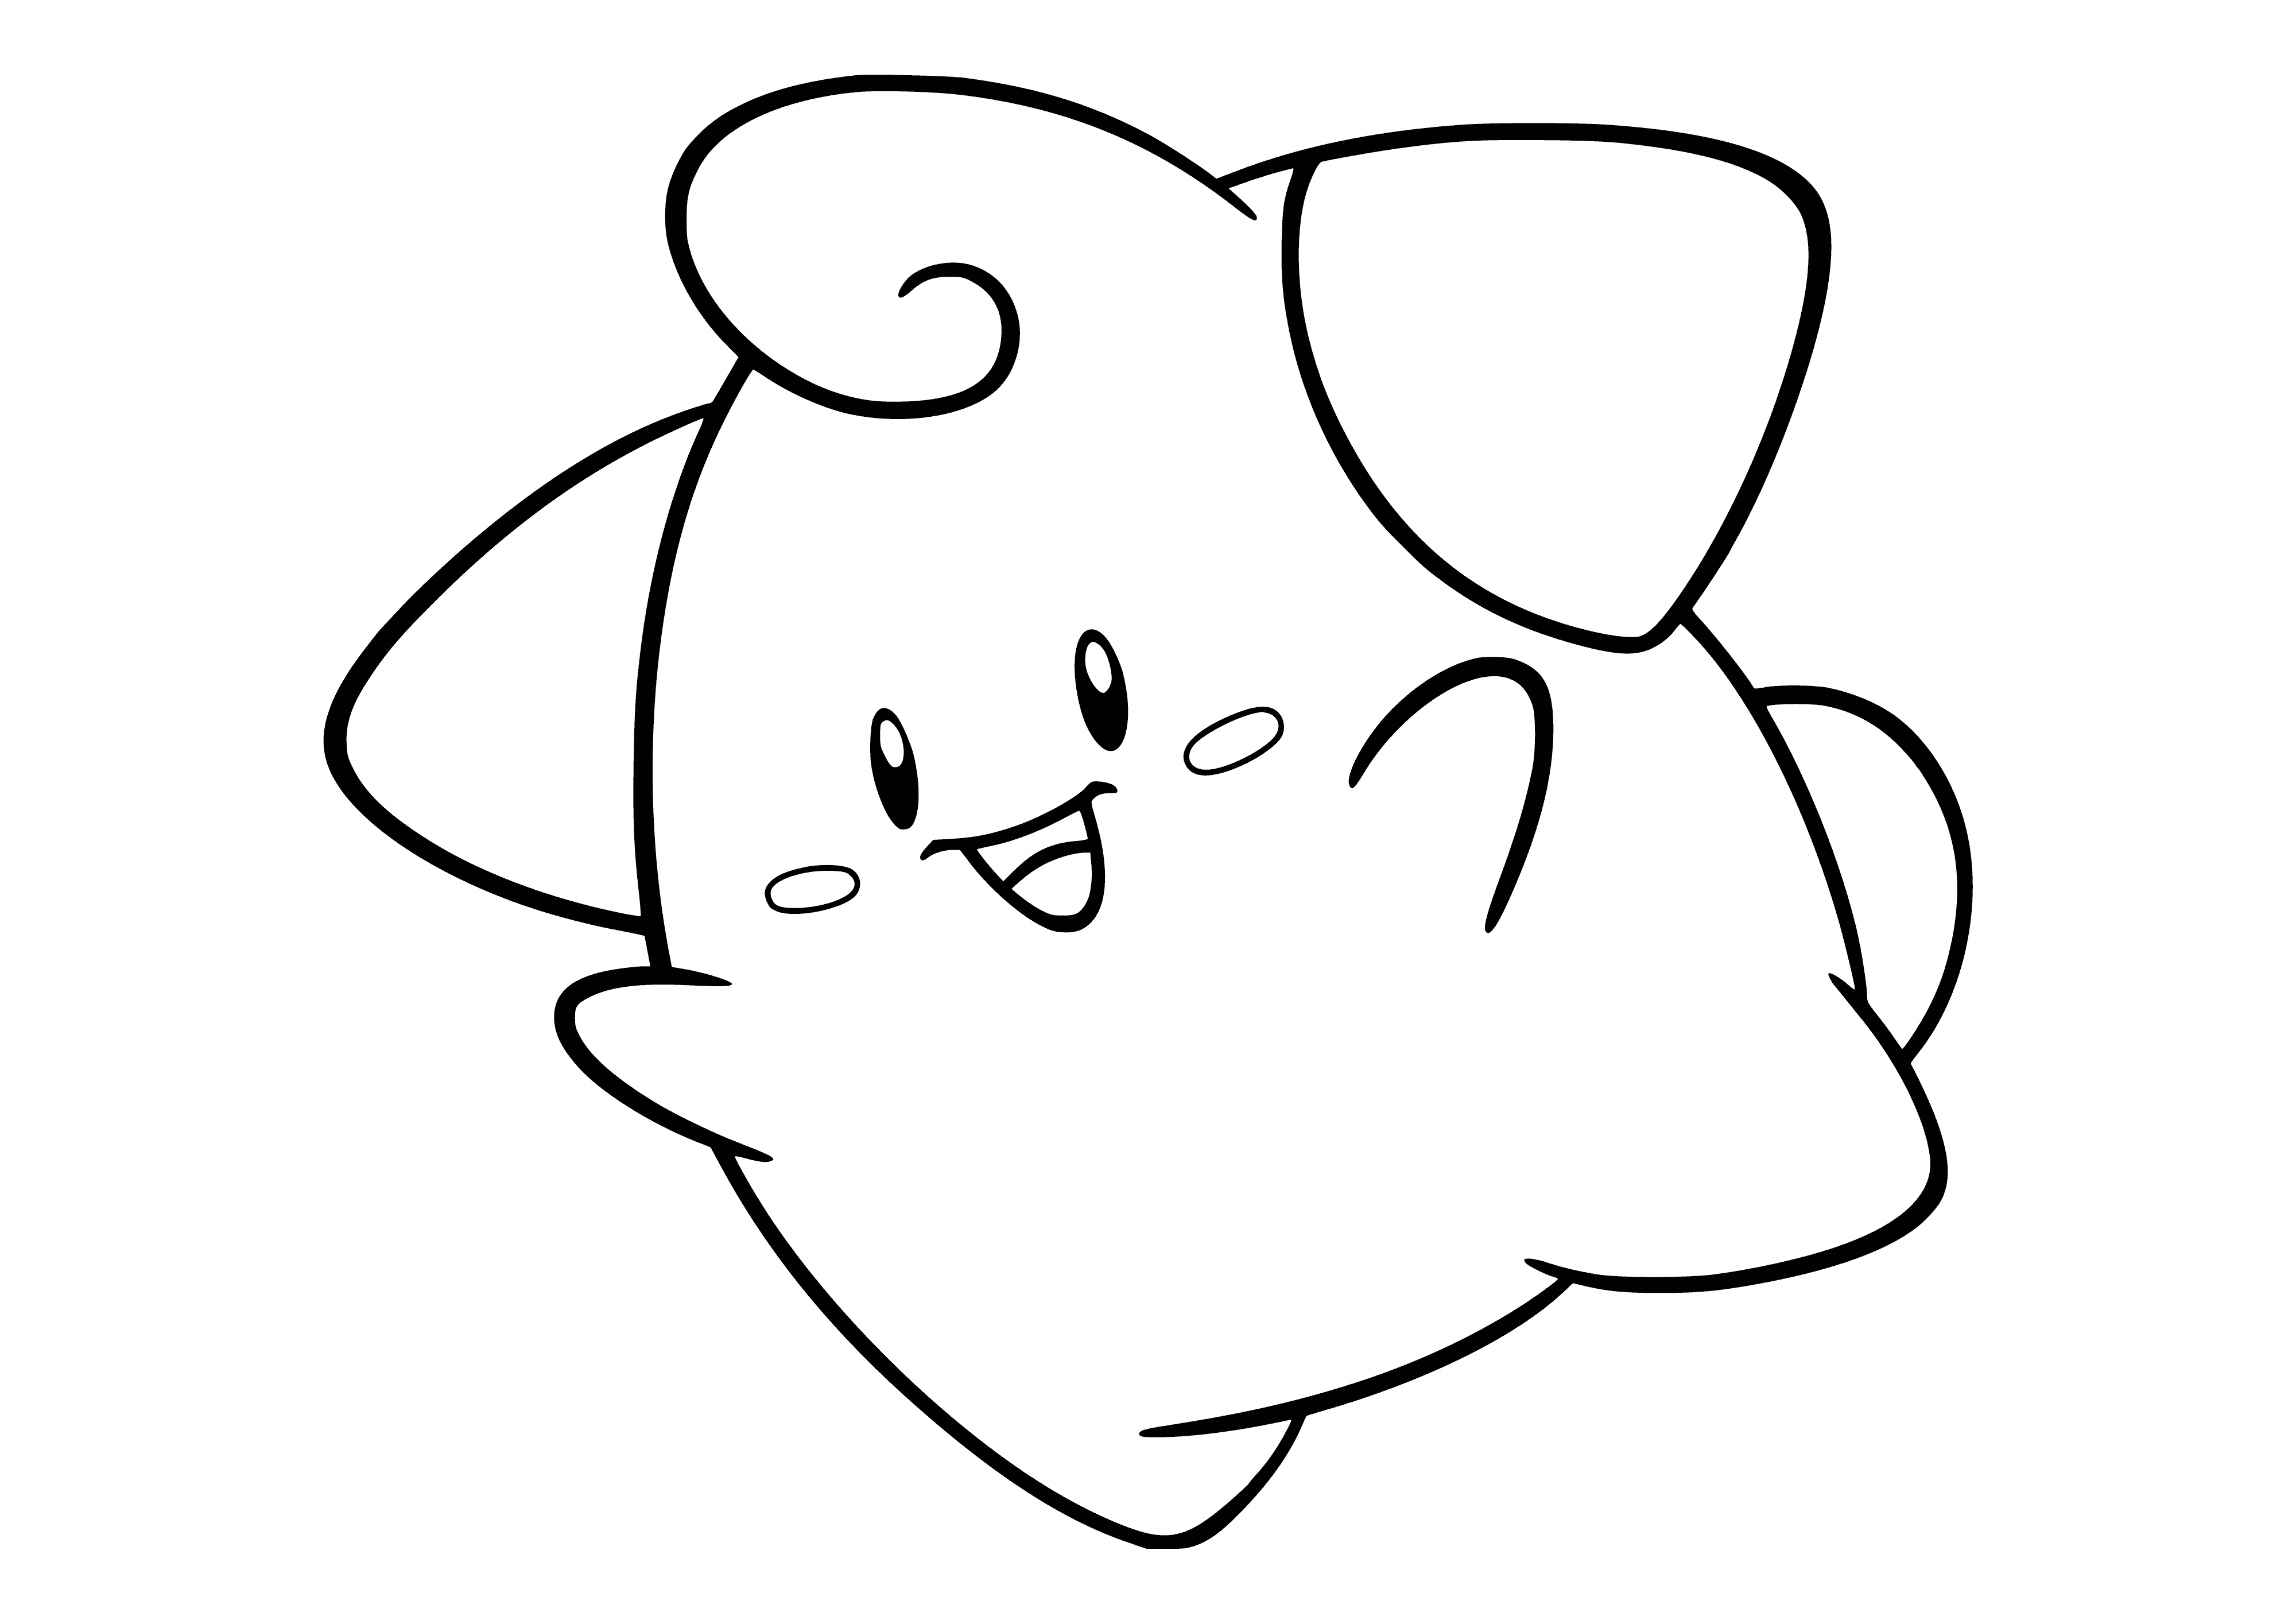 coloring page: Small, pink Pokémon w/ large head & wide mouth. Covered in soft, fluffy fur. Evolves into Clefairy.